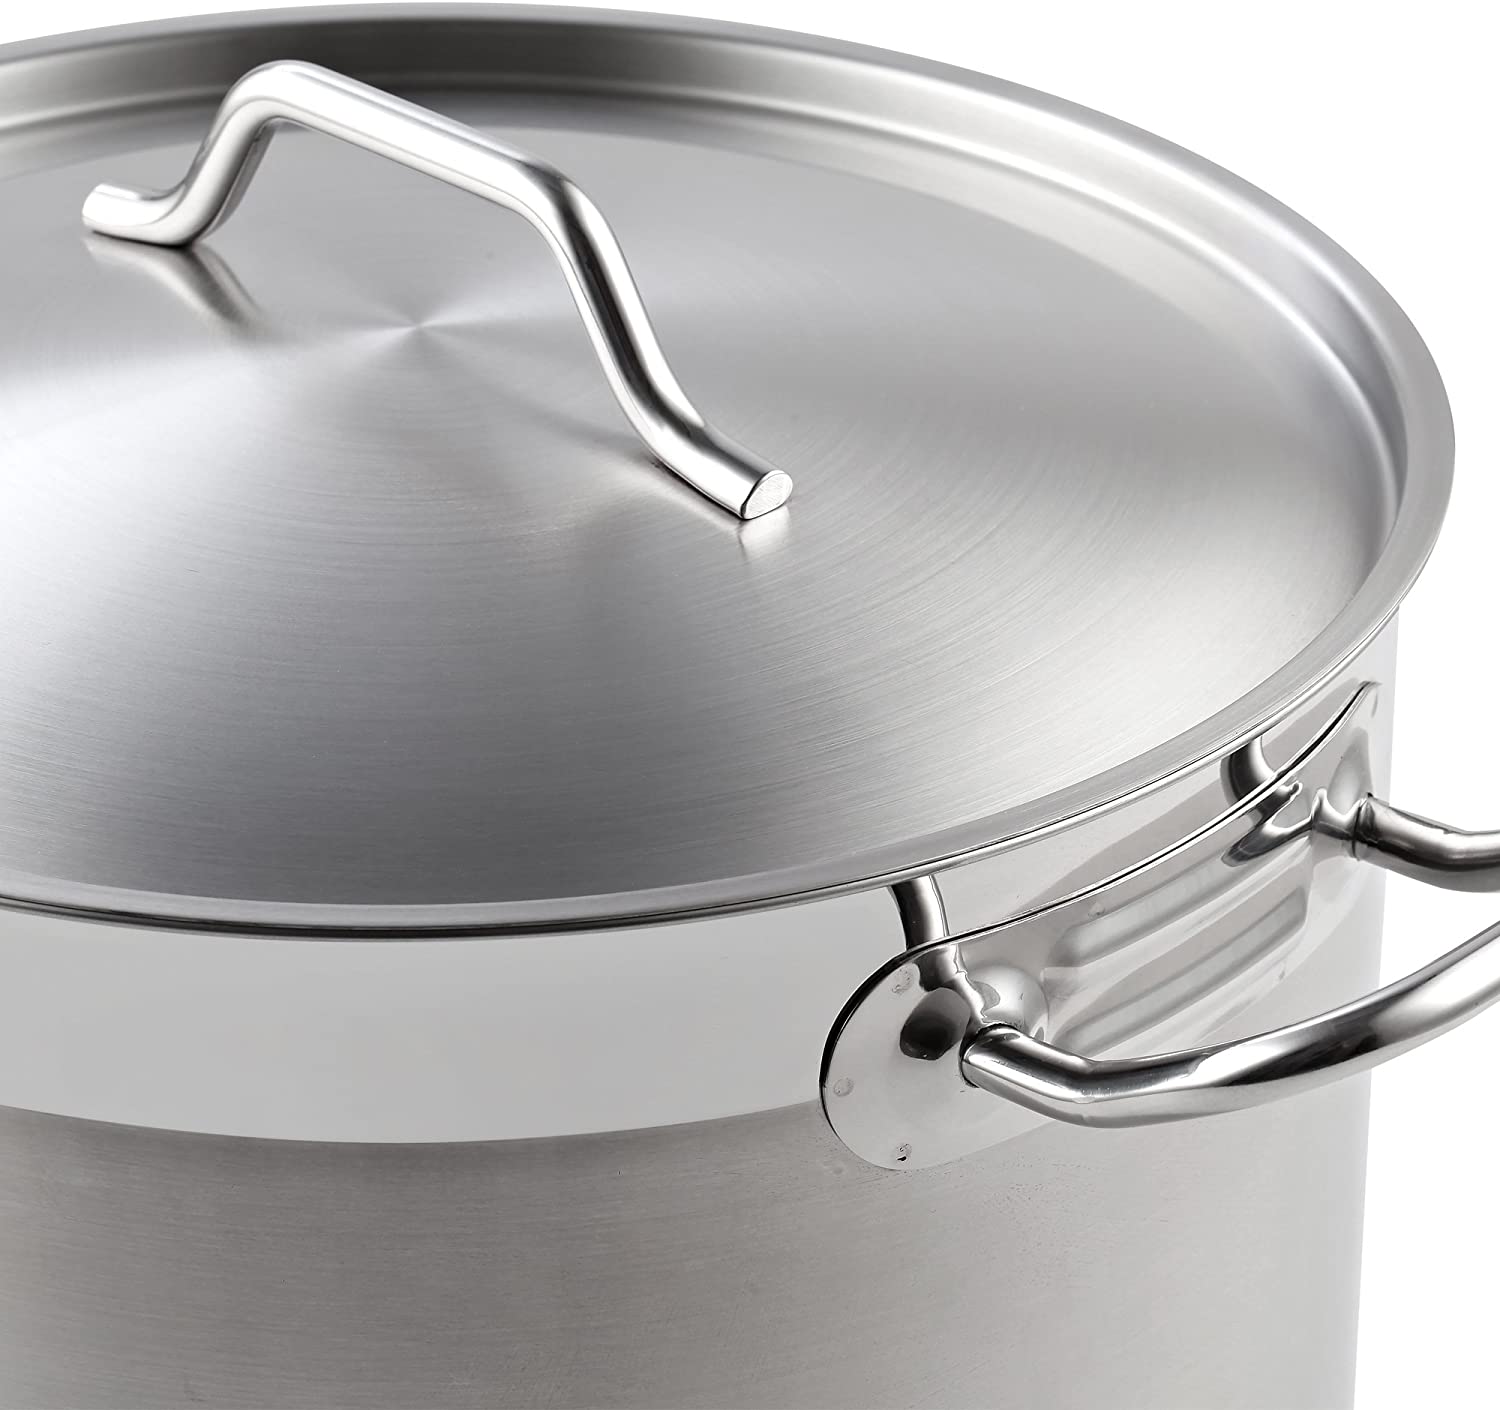 Neware Stainless Steel Stock Pot (20Qt)